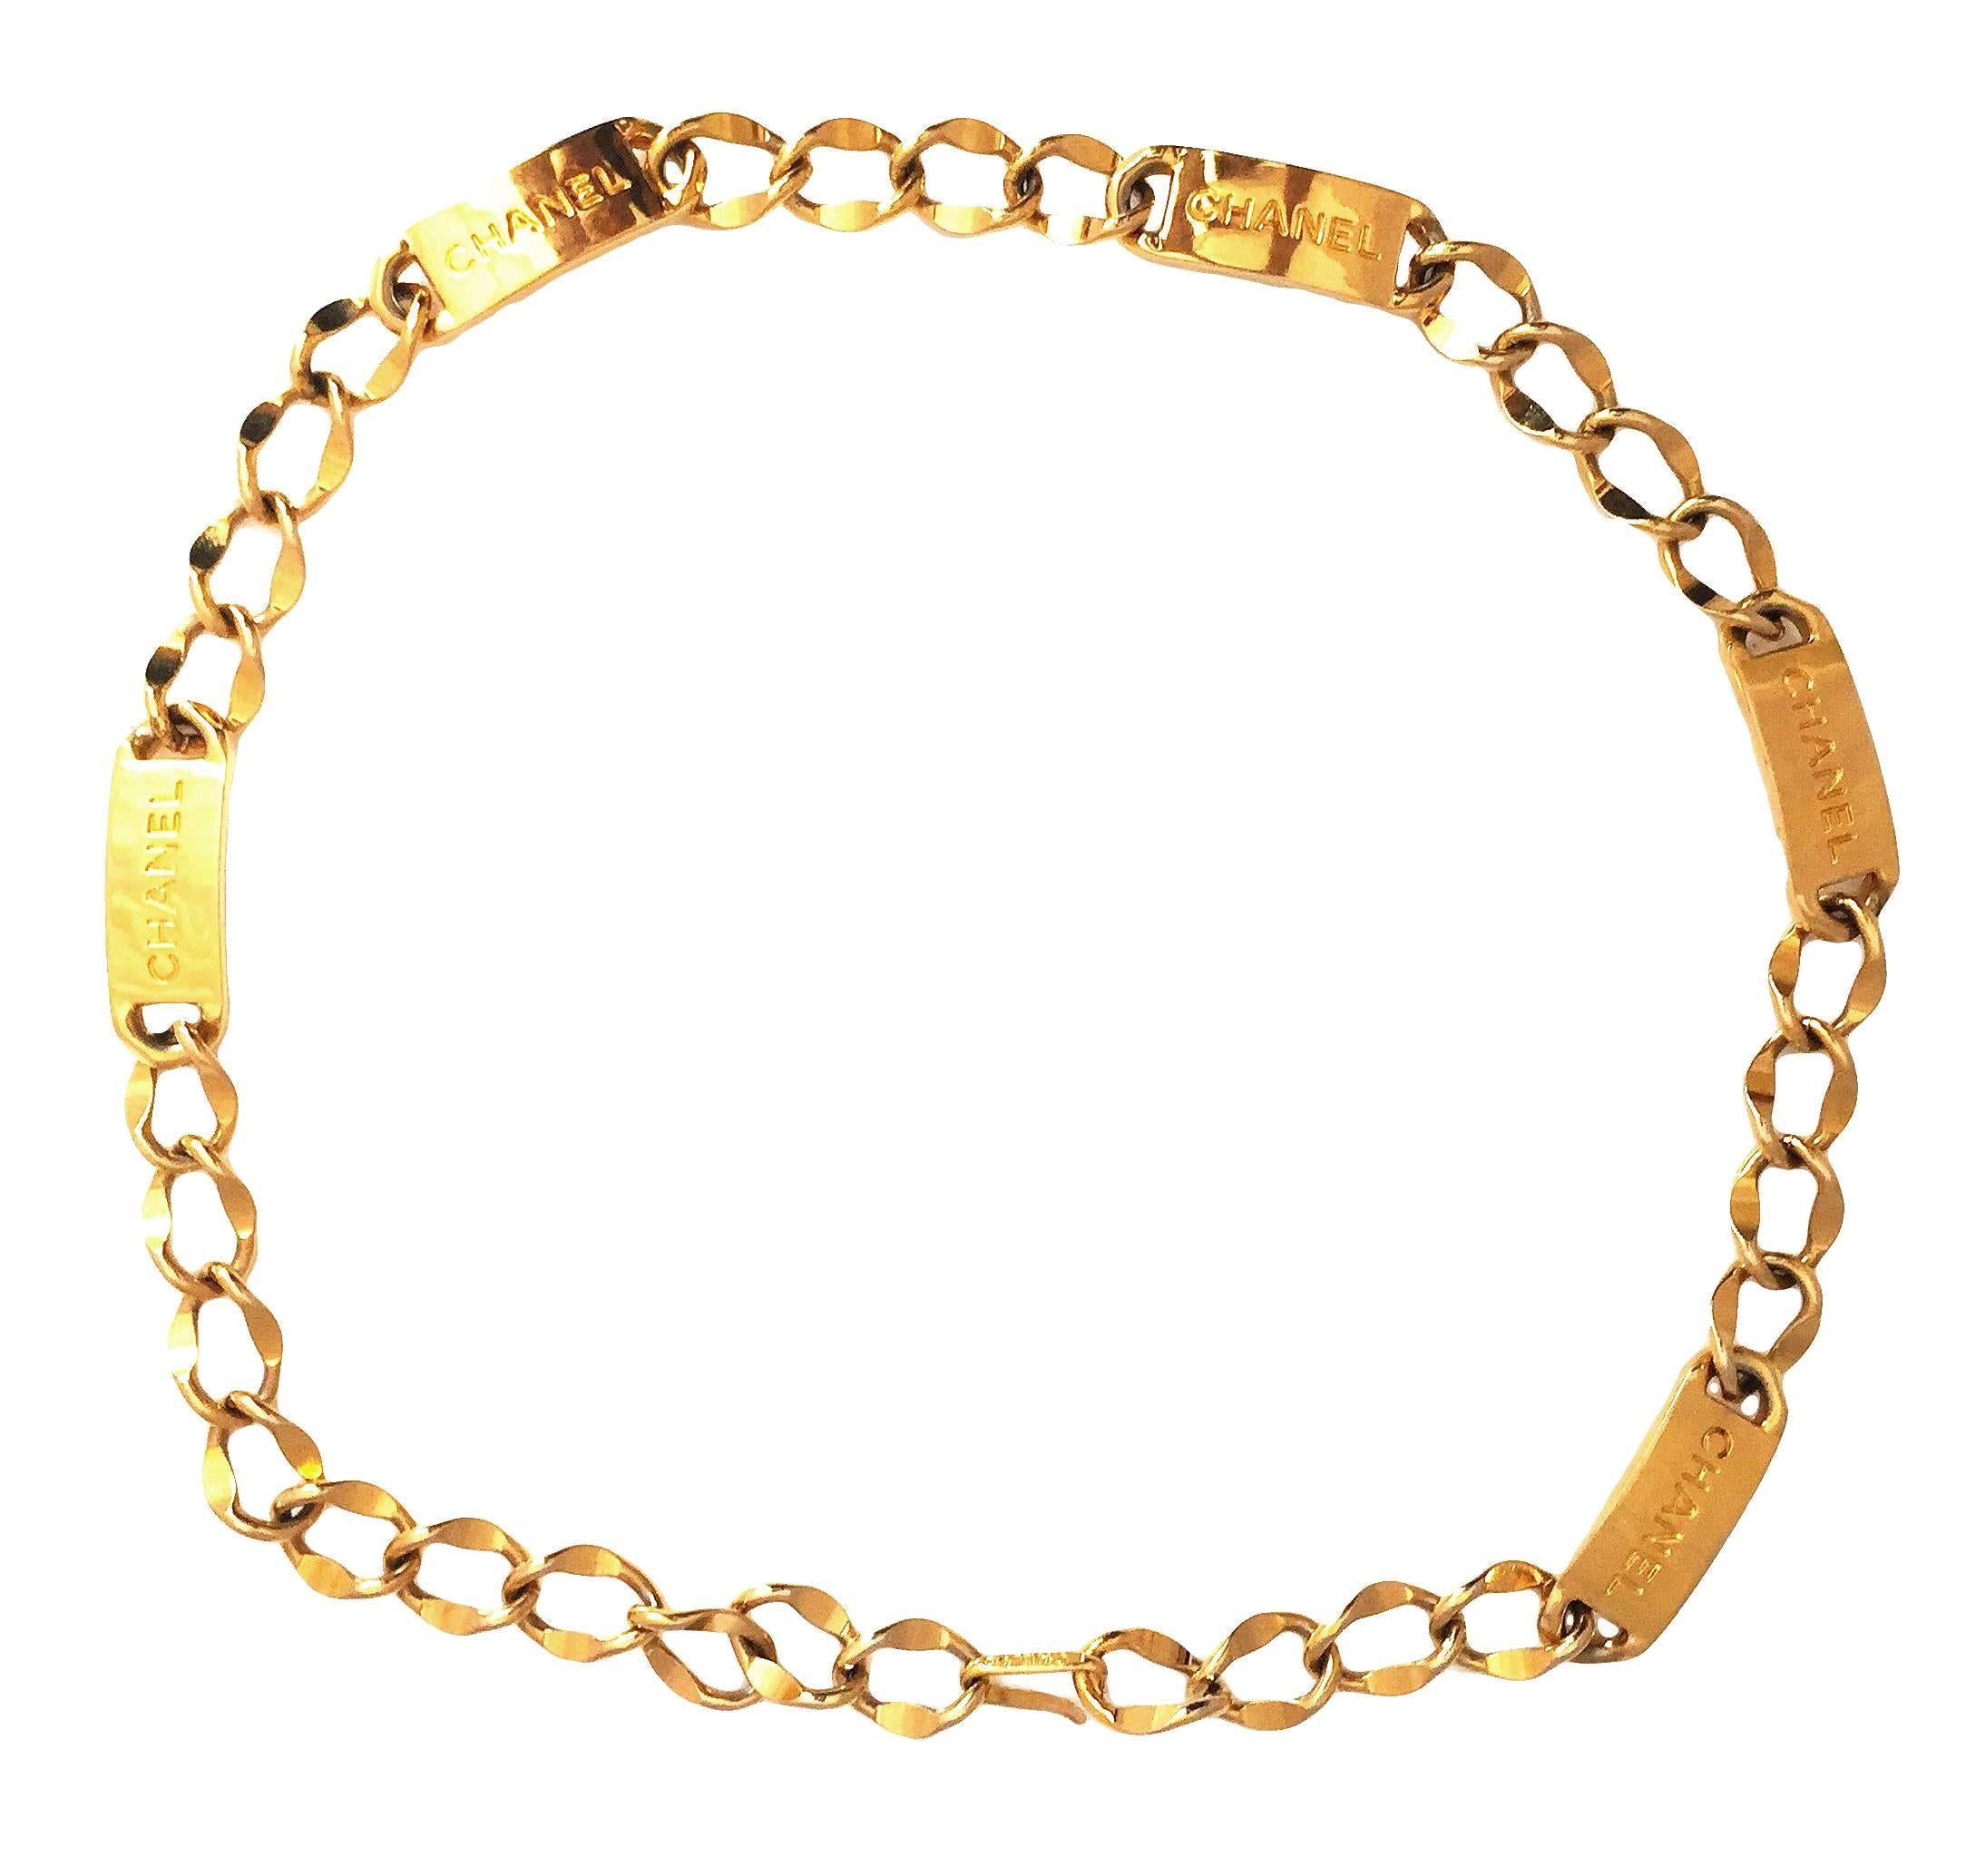 Chanel Vintage Gold-Tone Multi ID Chain Necklace or Belt, Circa 1980s In Good Condition For Sale In Bethesda, MD